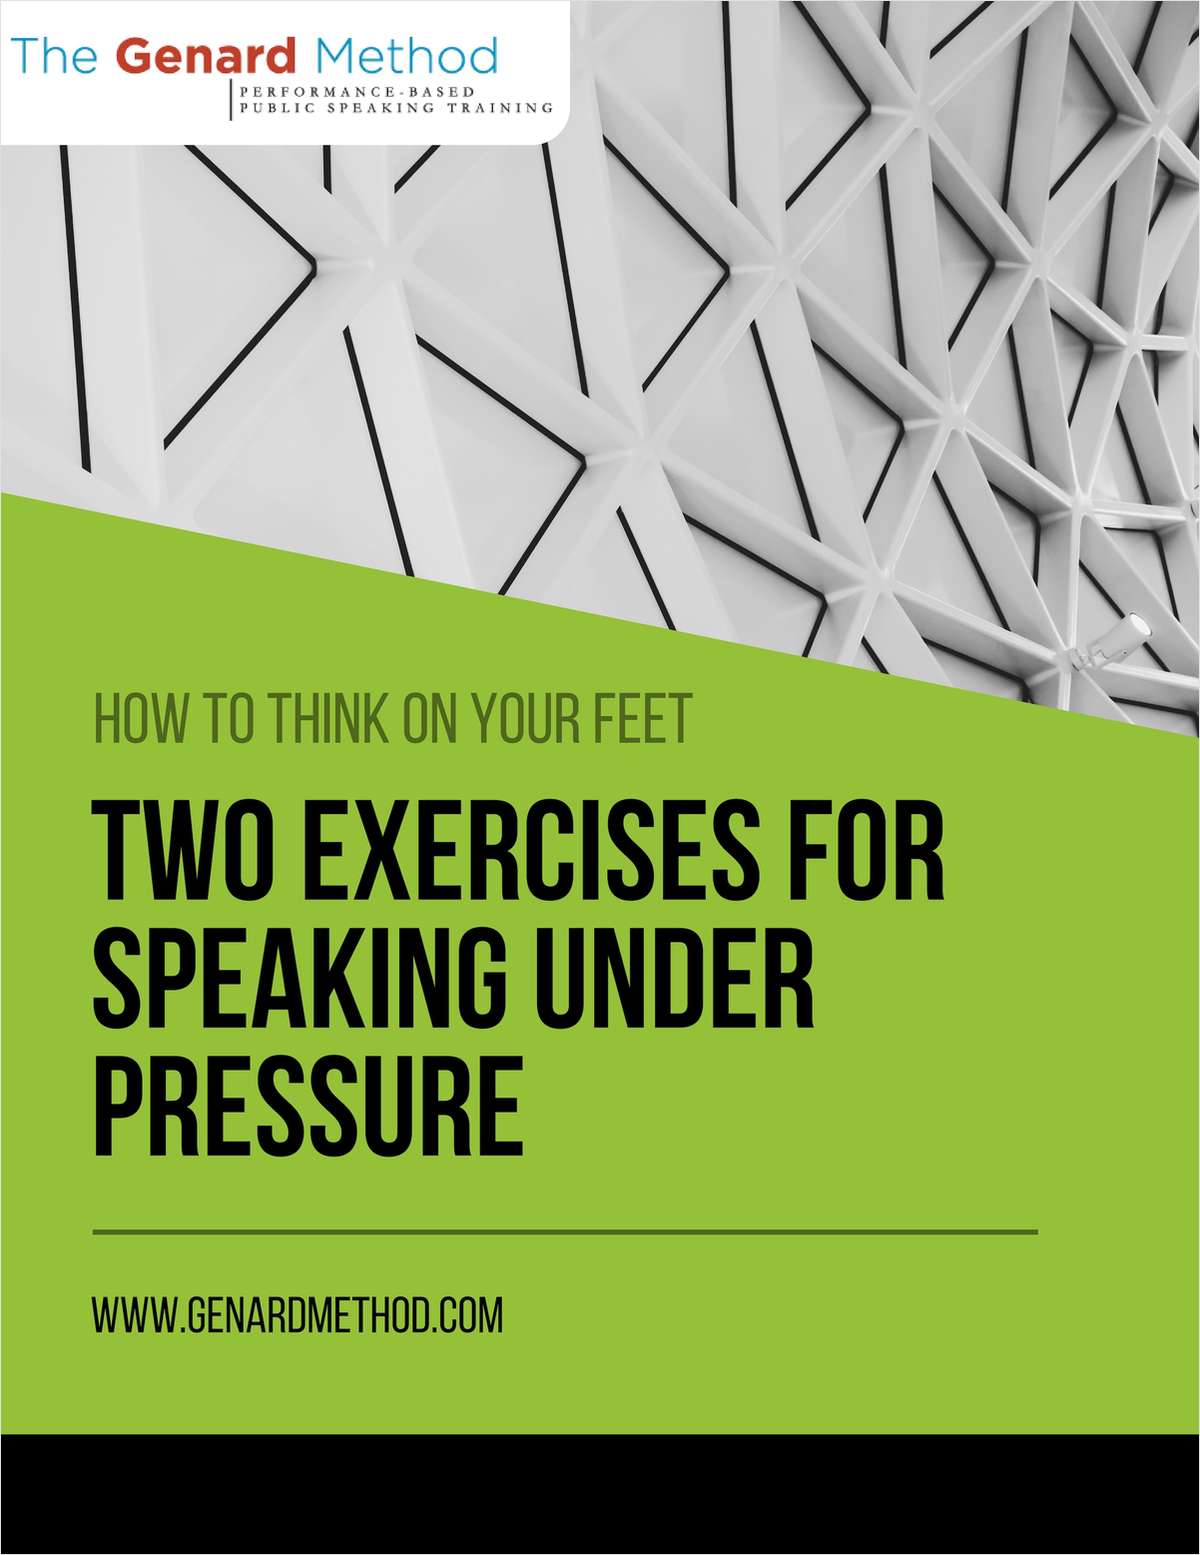 How to Think on Your Feet - Two Exercises for Speaking Under Pressure